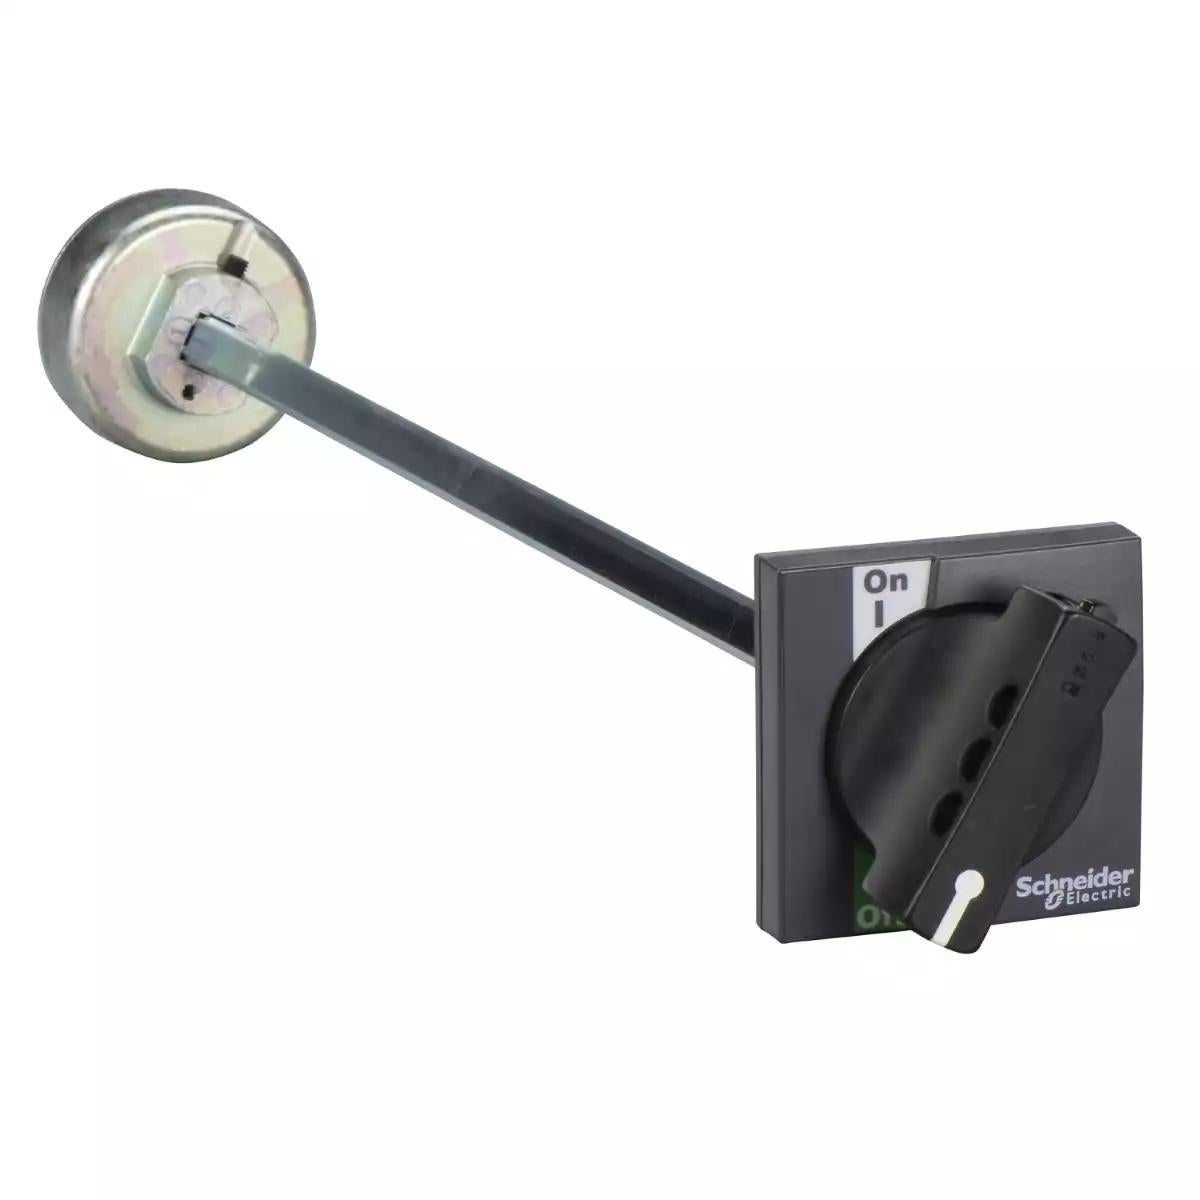 Schneider Electric Interpact INS/INV extended rotary handle for front control, Compact INS/INV 250, IP40, IK07, black handle